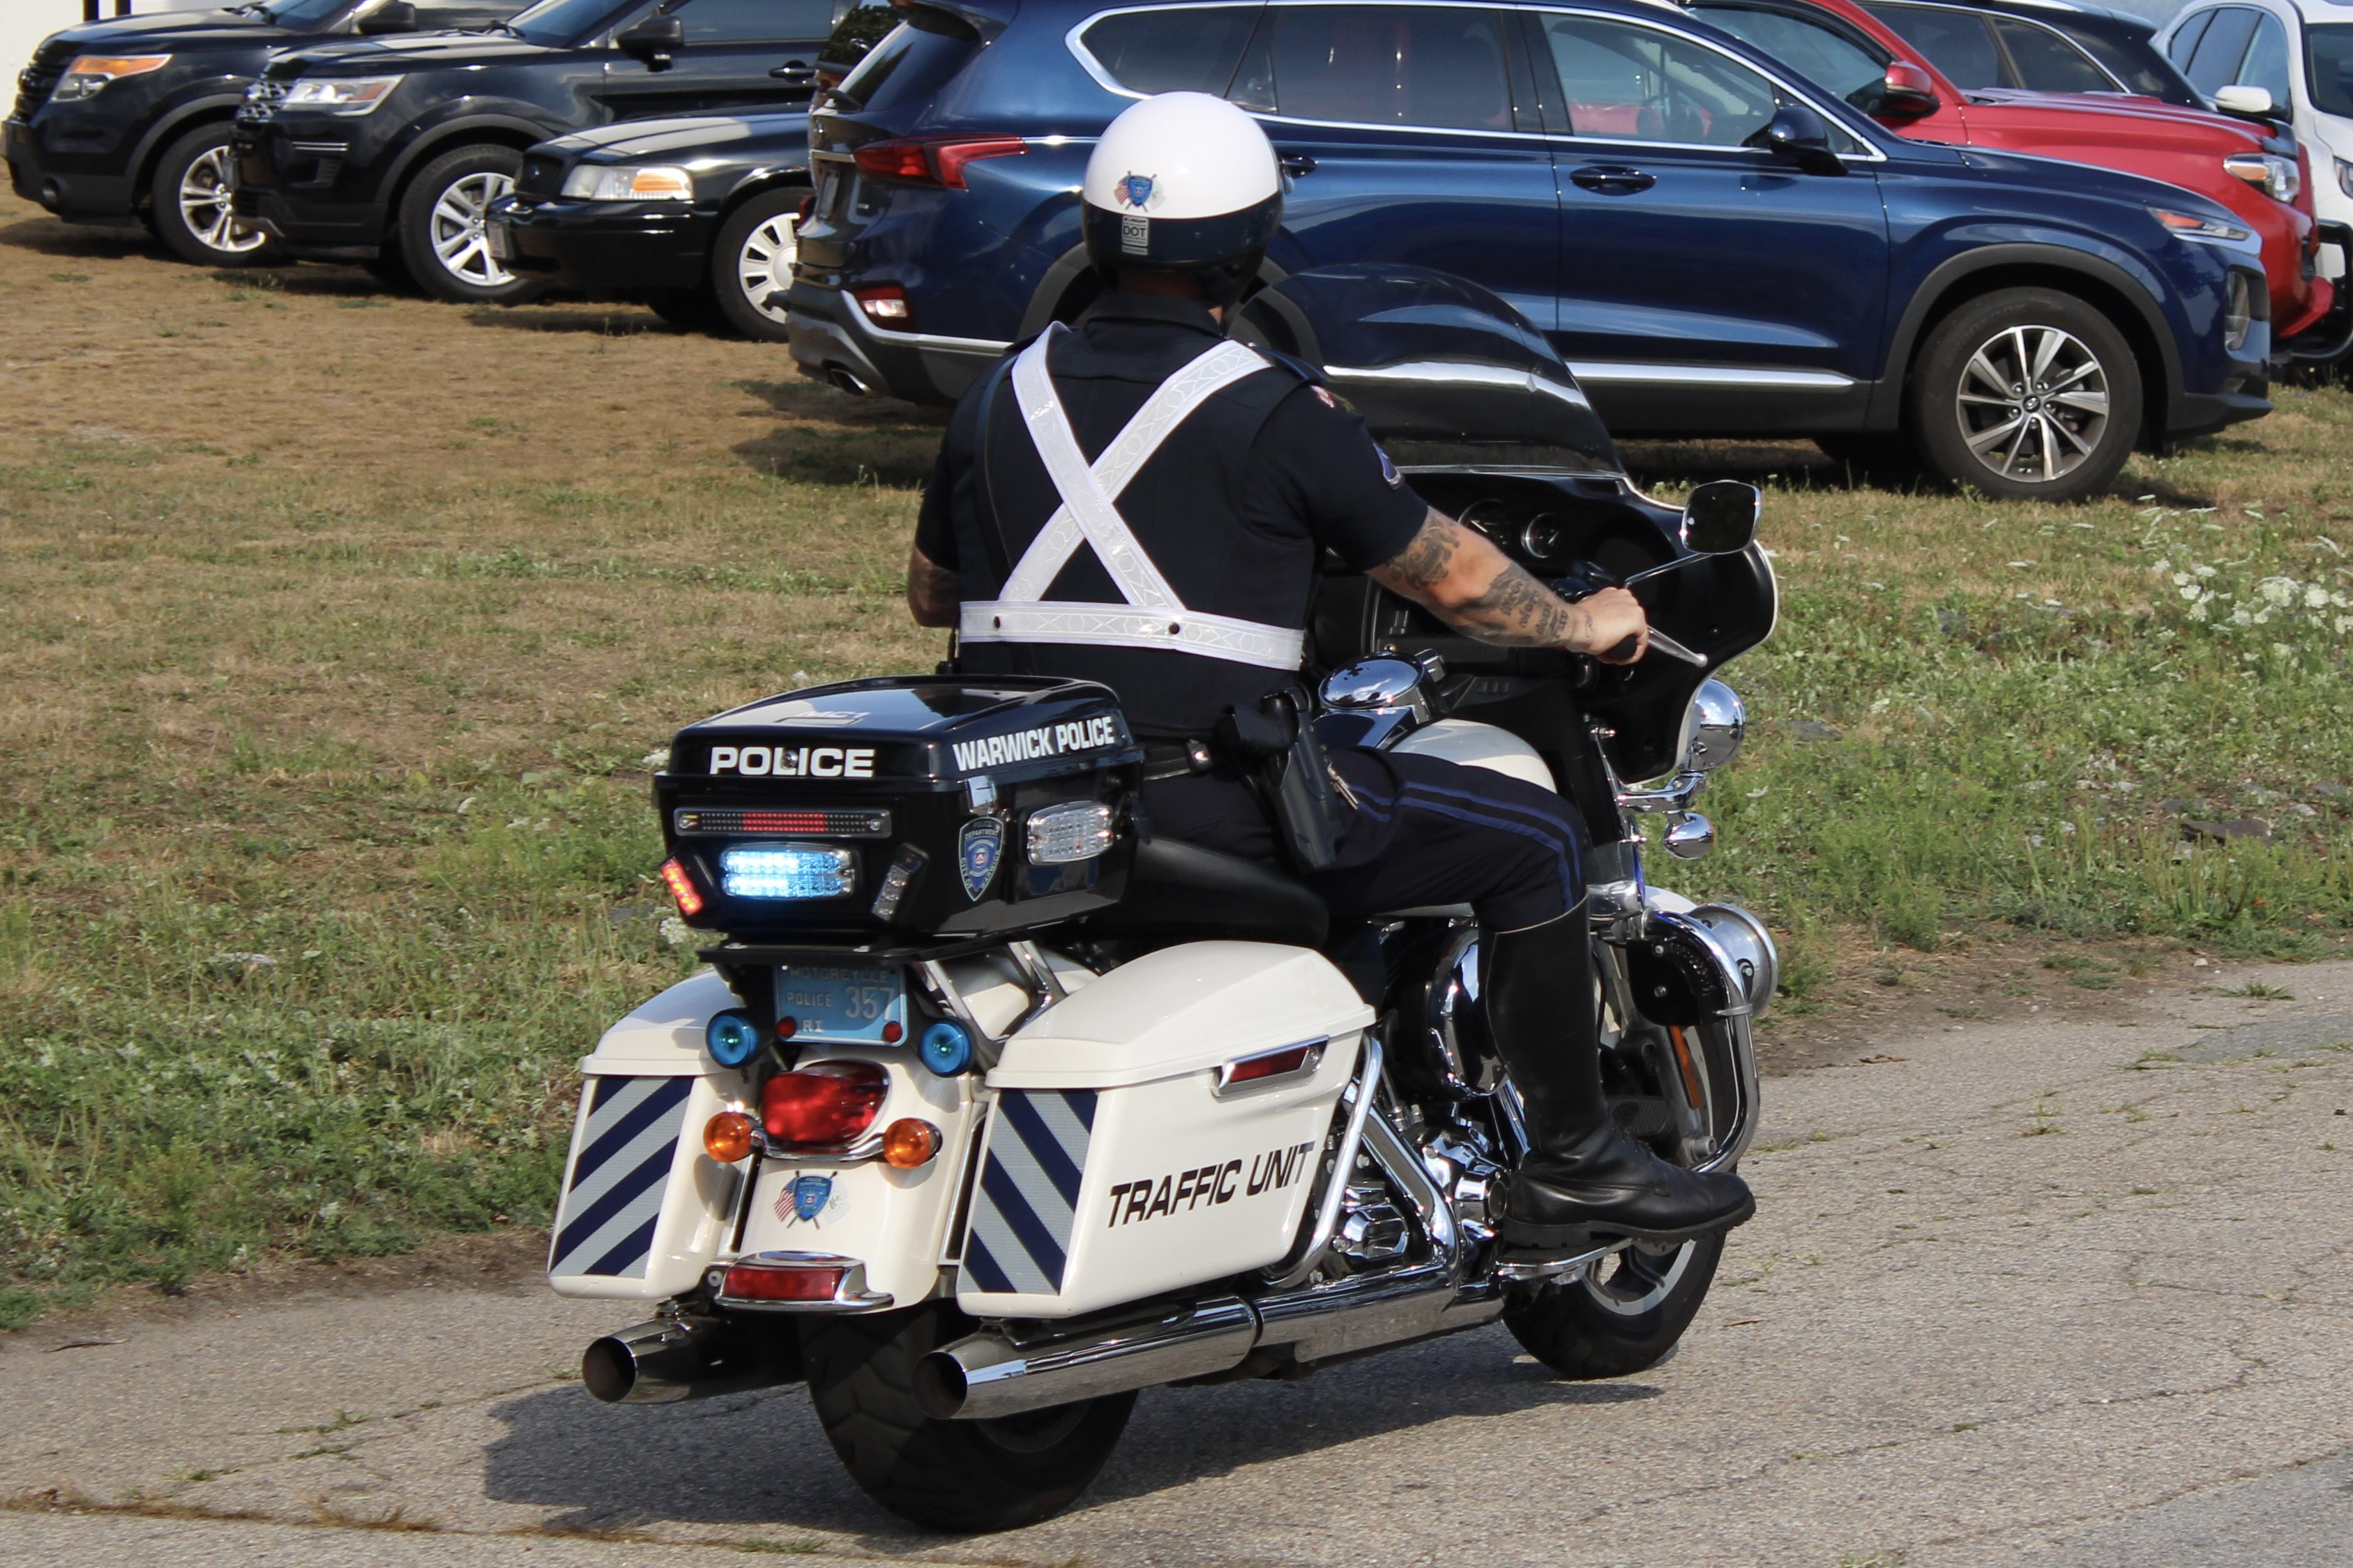 A photo  of Warwick Police
            Motorcycle, a 2020-2022 Harley Davidson Electra Glide             taken by @riemergencyvehicles